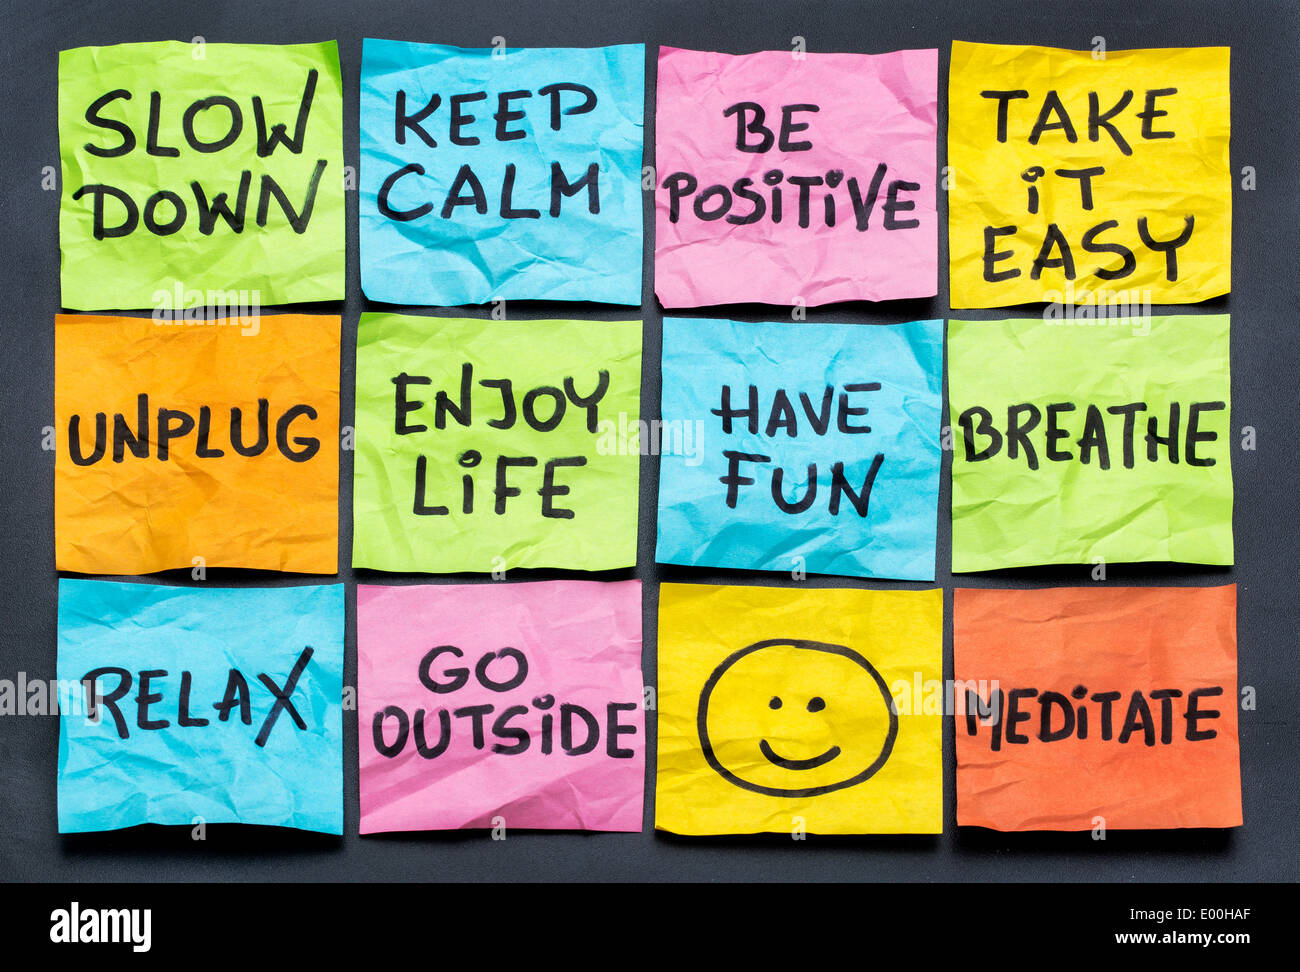 slow down, relax, take it easy, keep calm and other motivational lifestyle reminders on colorful sticky notes Stock Photo